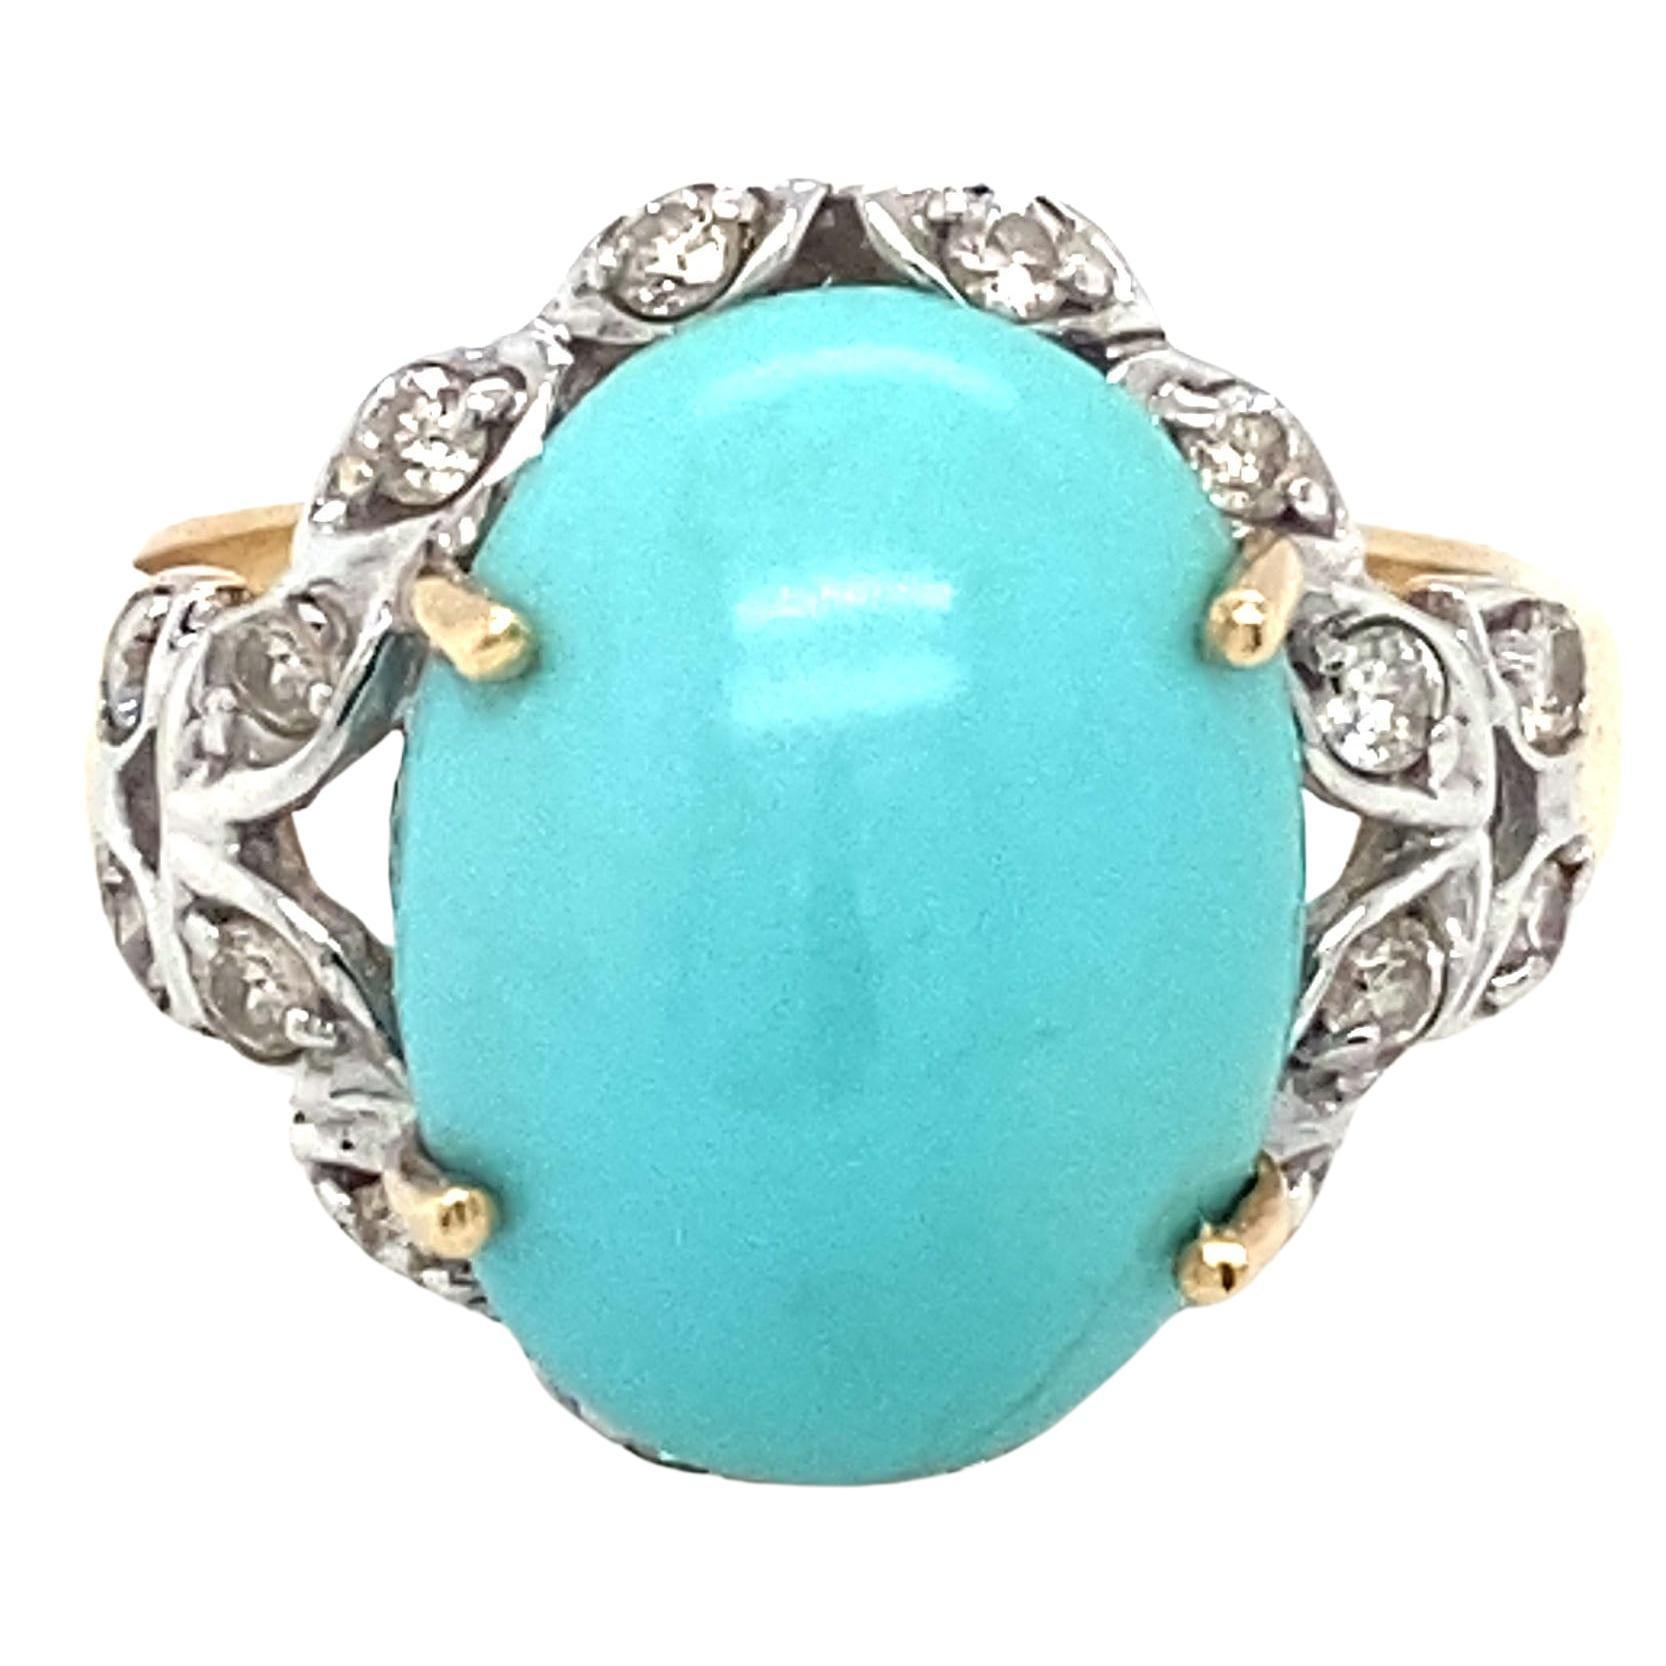 2000s Persian Turquoise and Diamond Ring in 14 Karat Gold